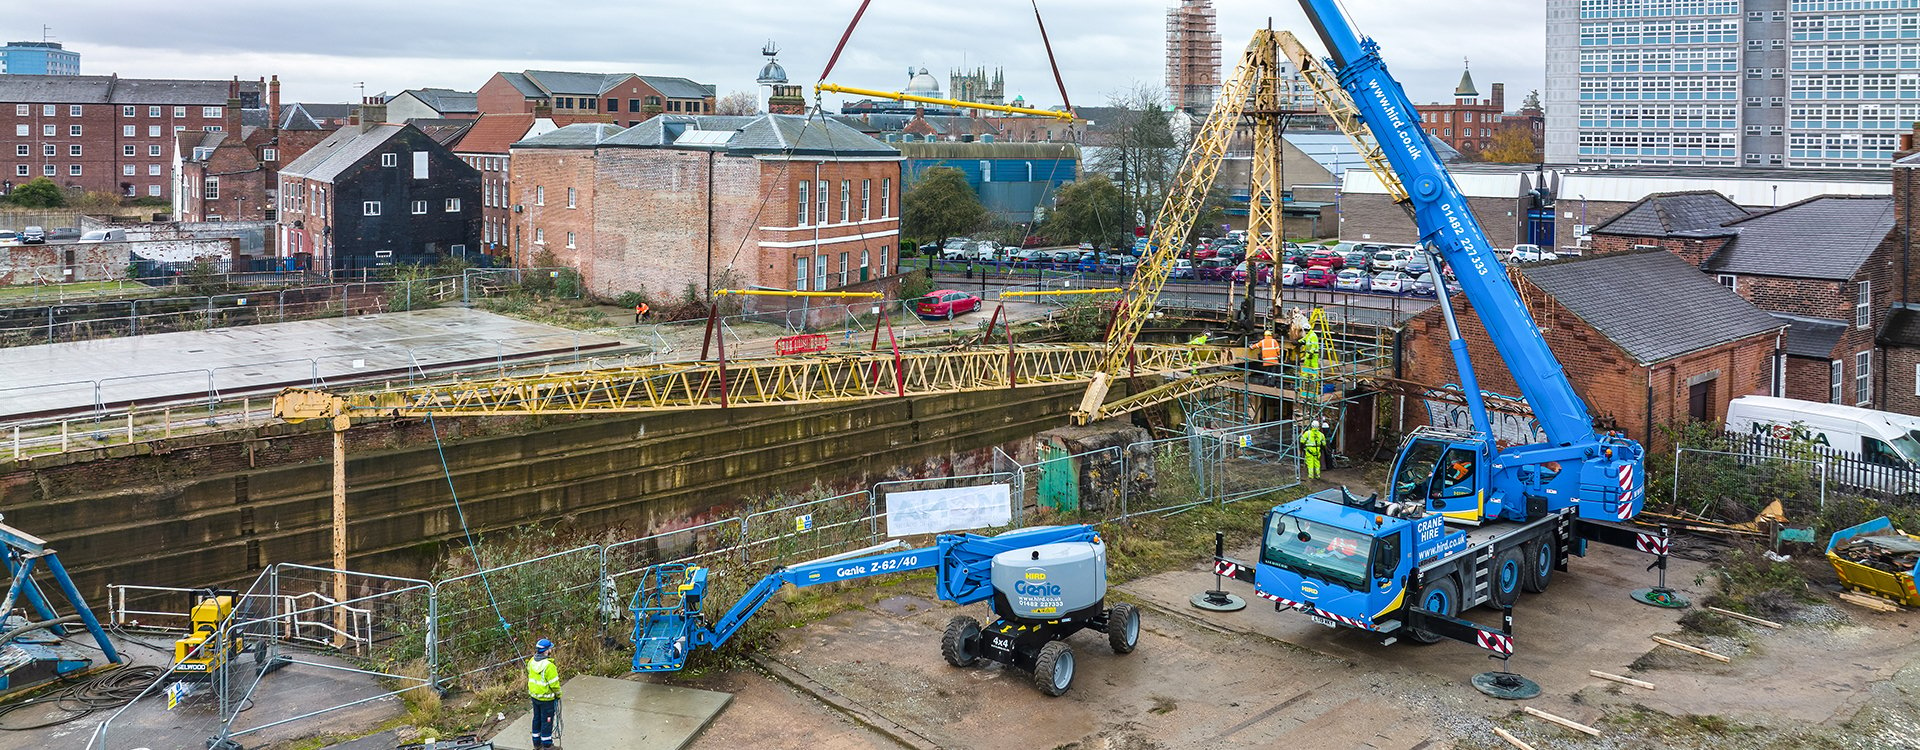 powered access boom and mobile crane contract lifting